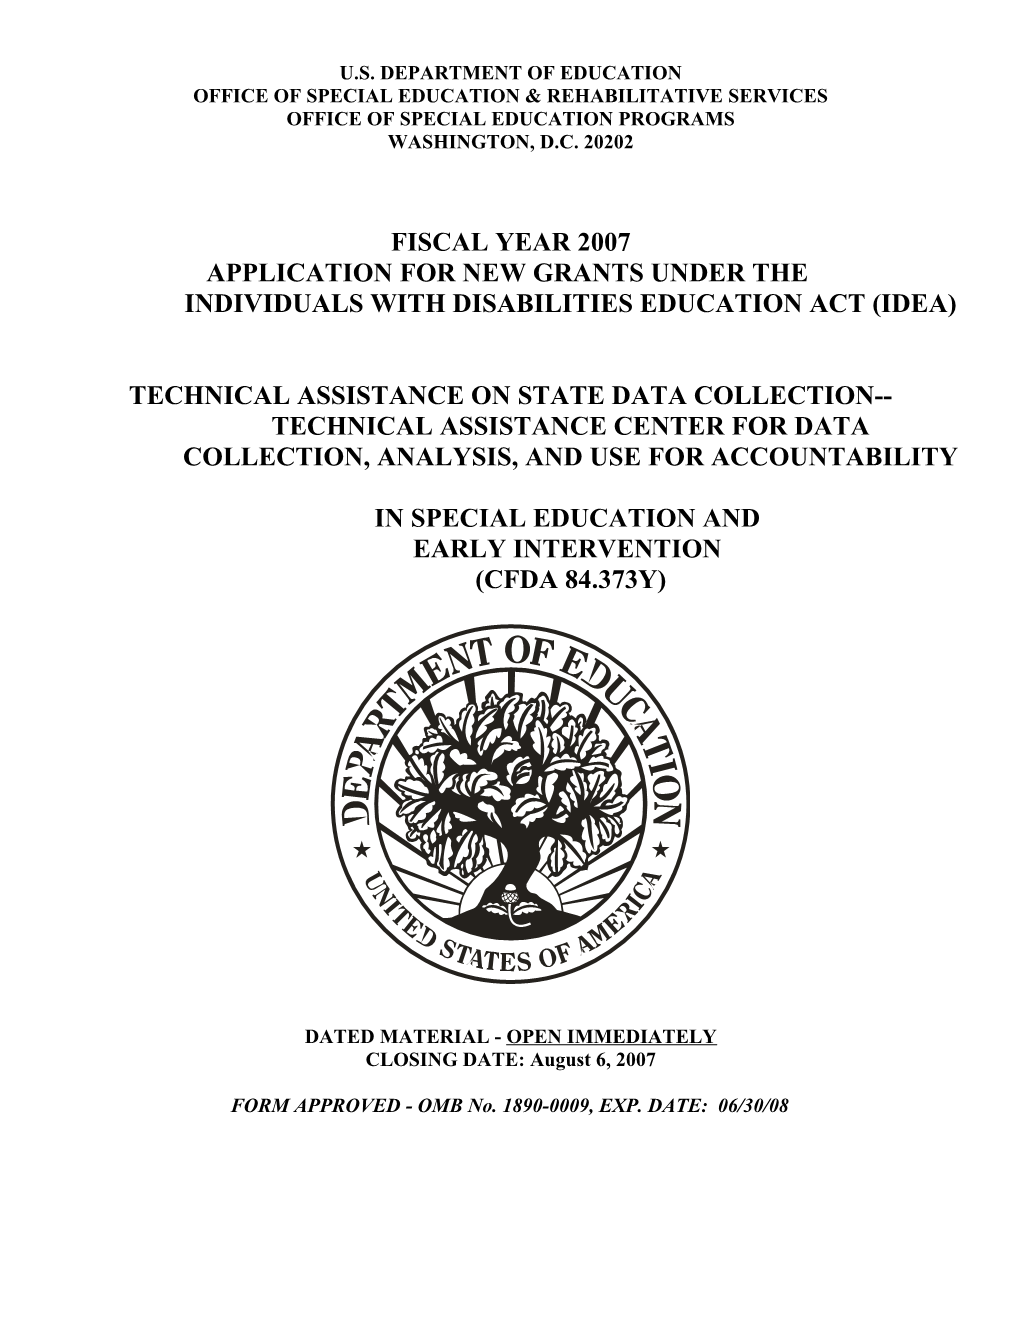 Fiscal Year 2007 Application for New Grants, Technical Assistance on State Data Collection